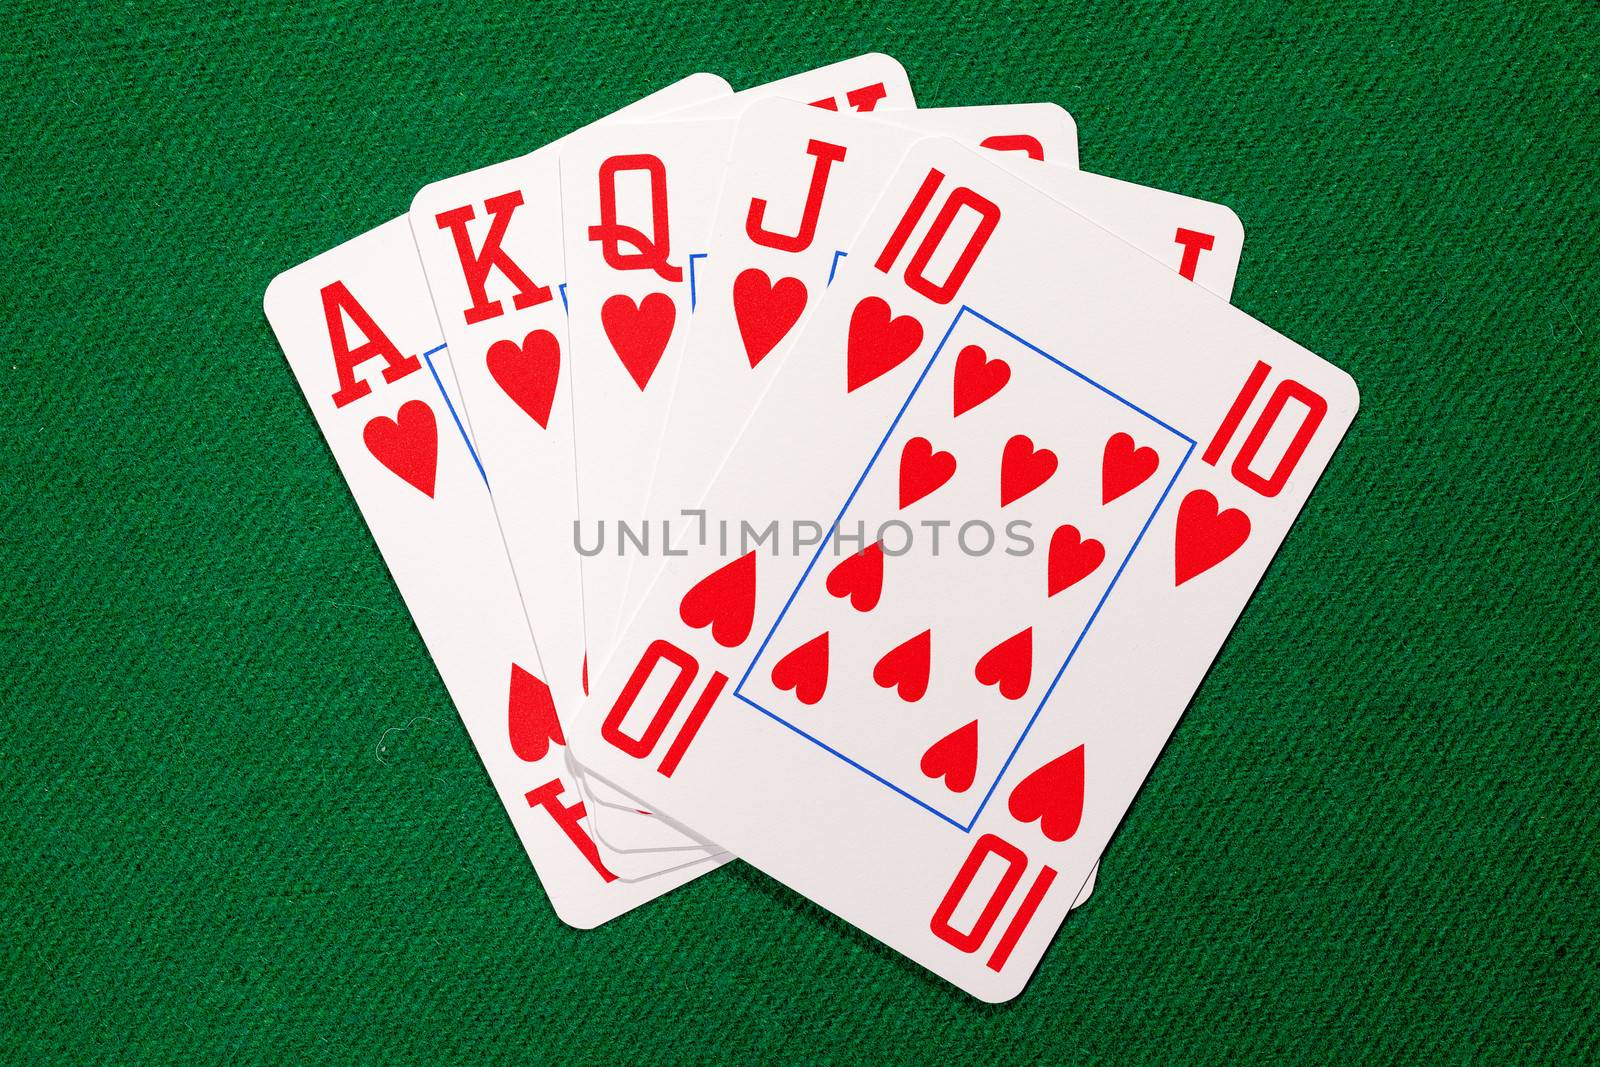 Poker cards with royal flush combination on green cloth